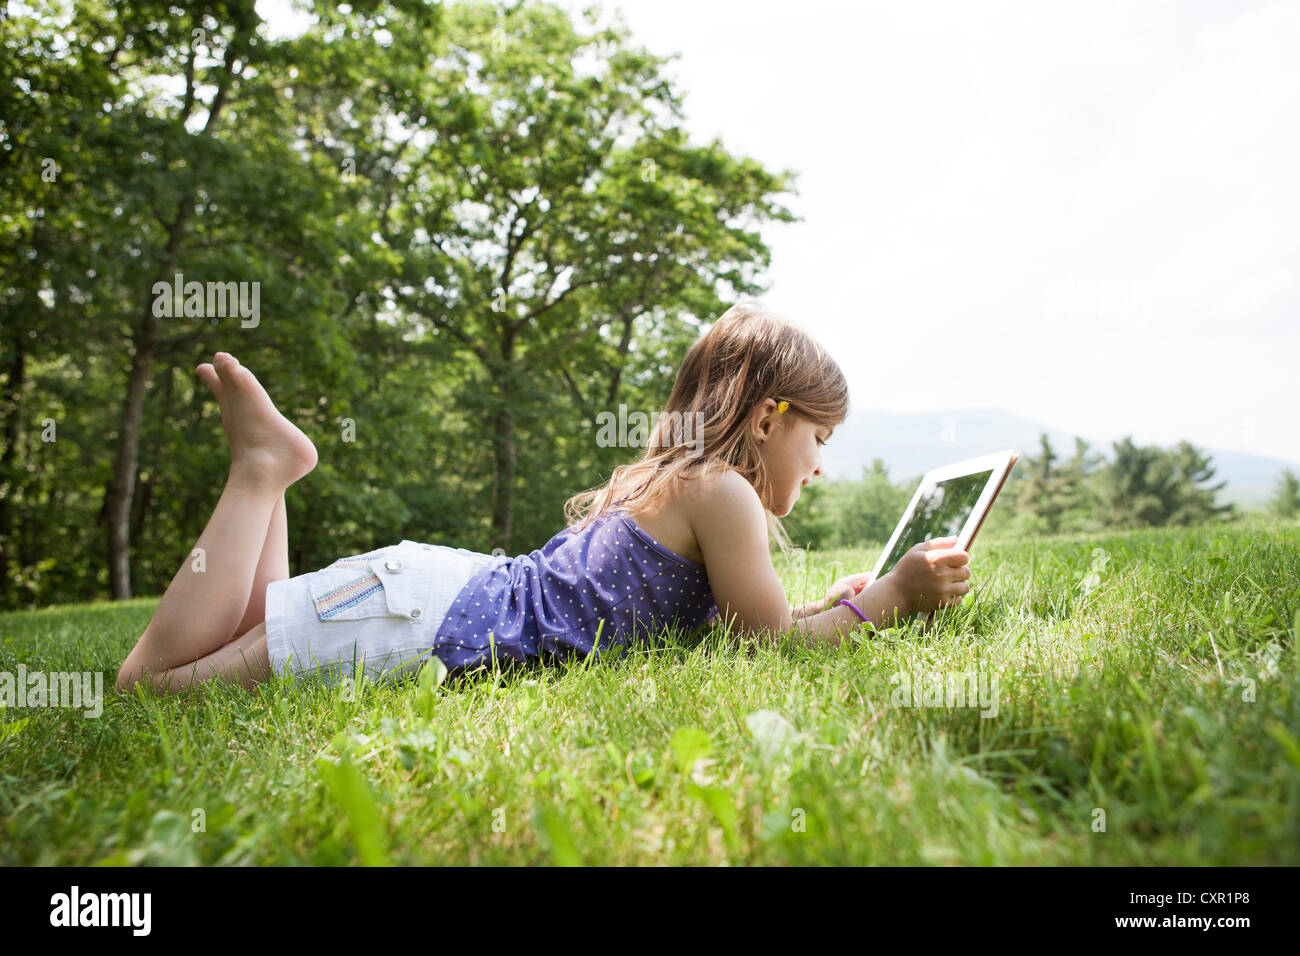 Girl lying on grass with digital tablet Stock Photo